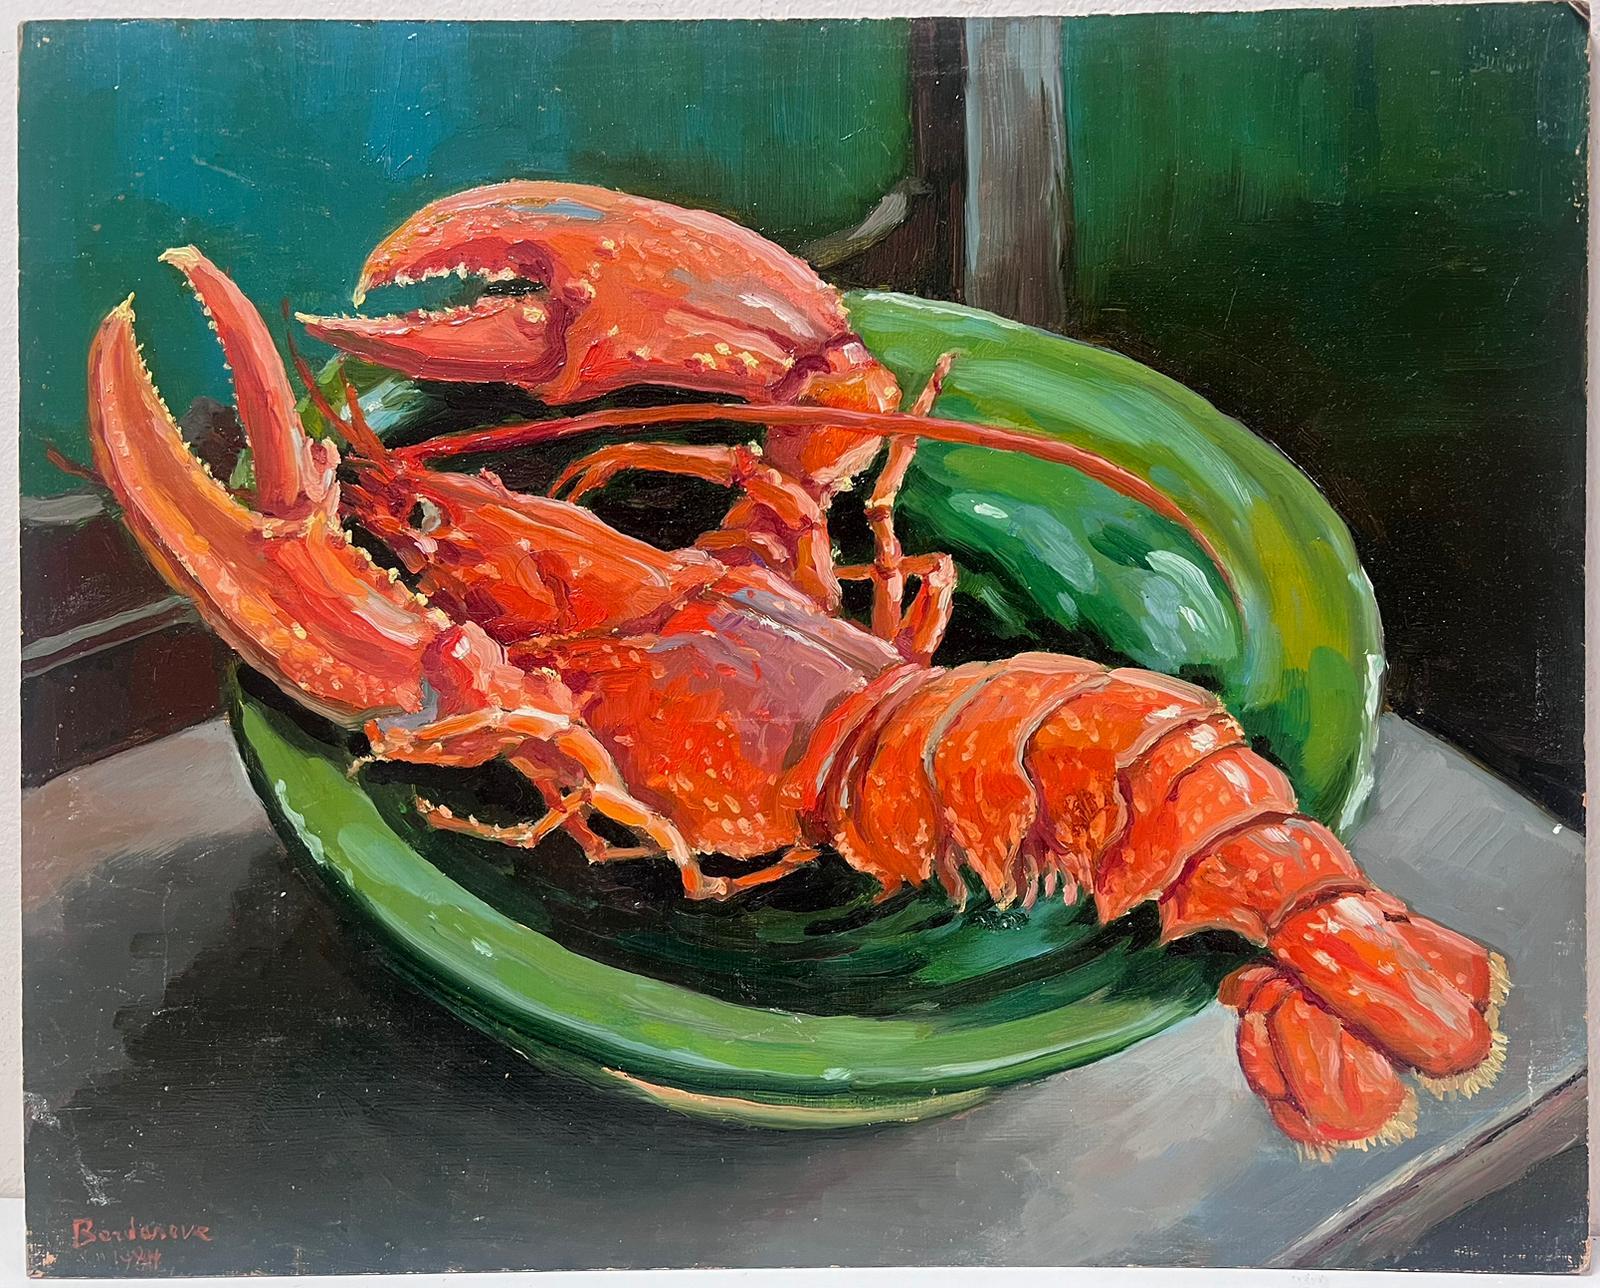 Contemporary French Impressionist Oil The Red Lobster on the Kitchen Table - Painting by Georges Bordonove